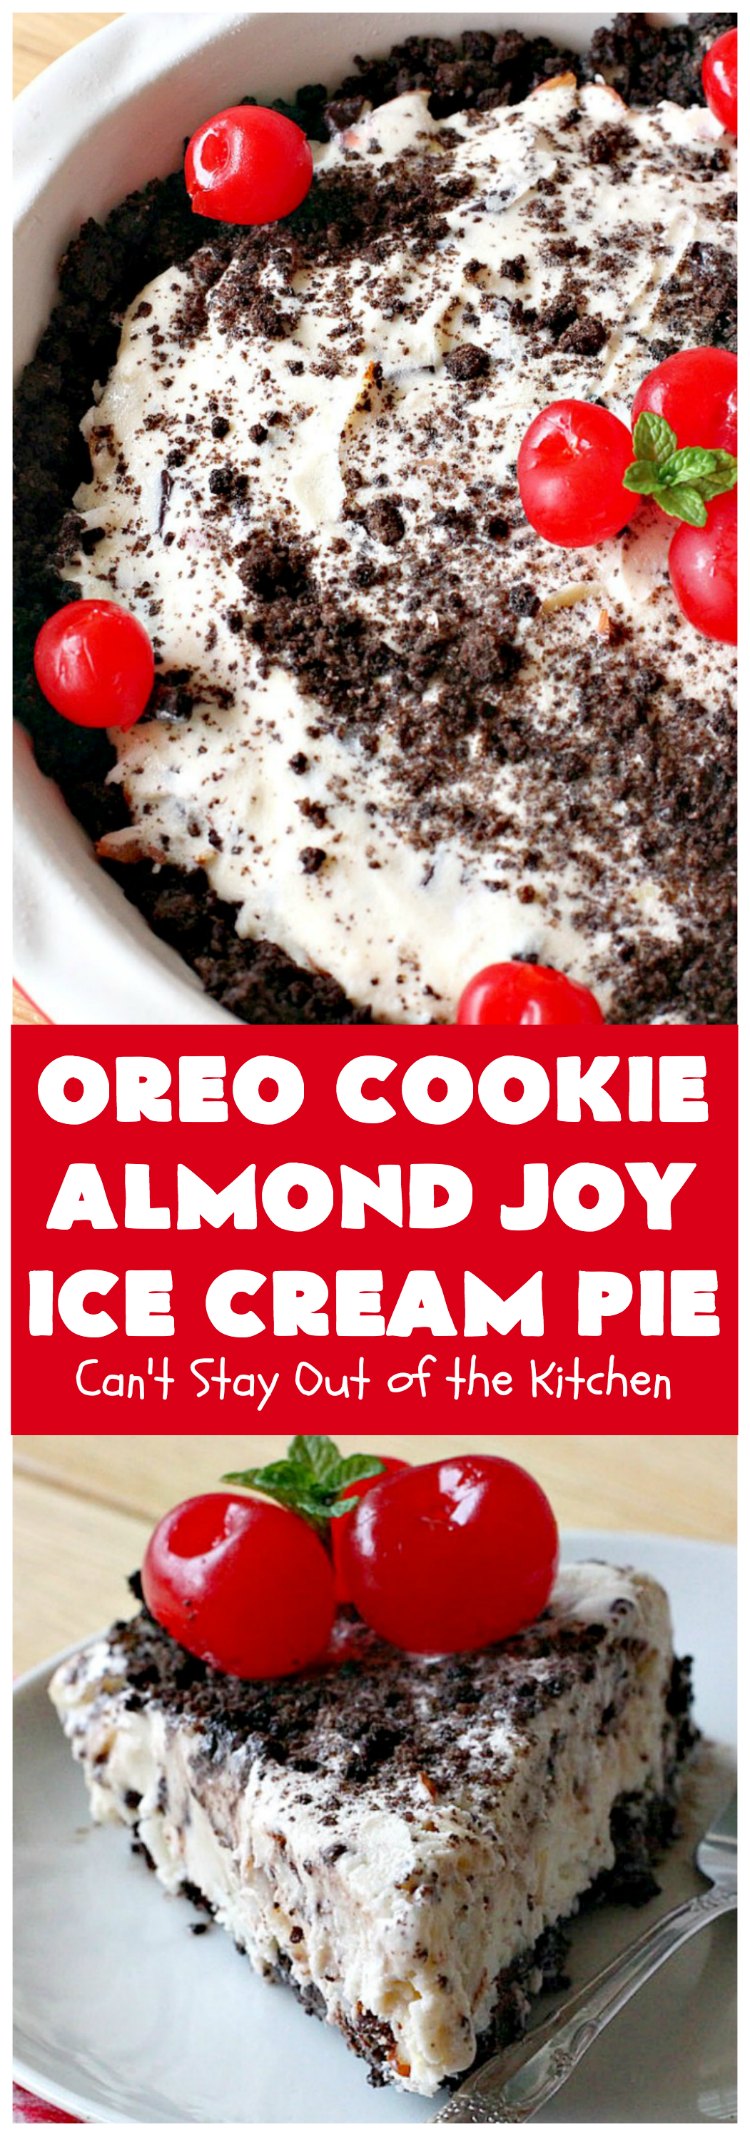 Oreo Cookie Almond Joy Ice Cream Pie | Can't Stay Out of the Kitchen